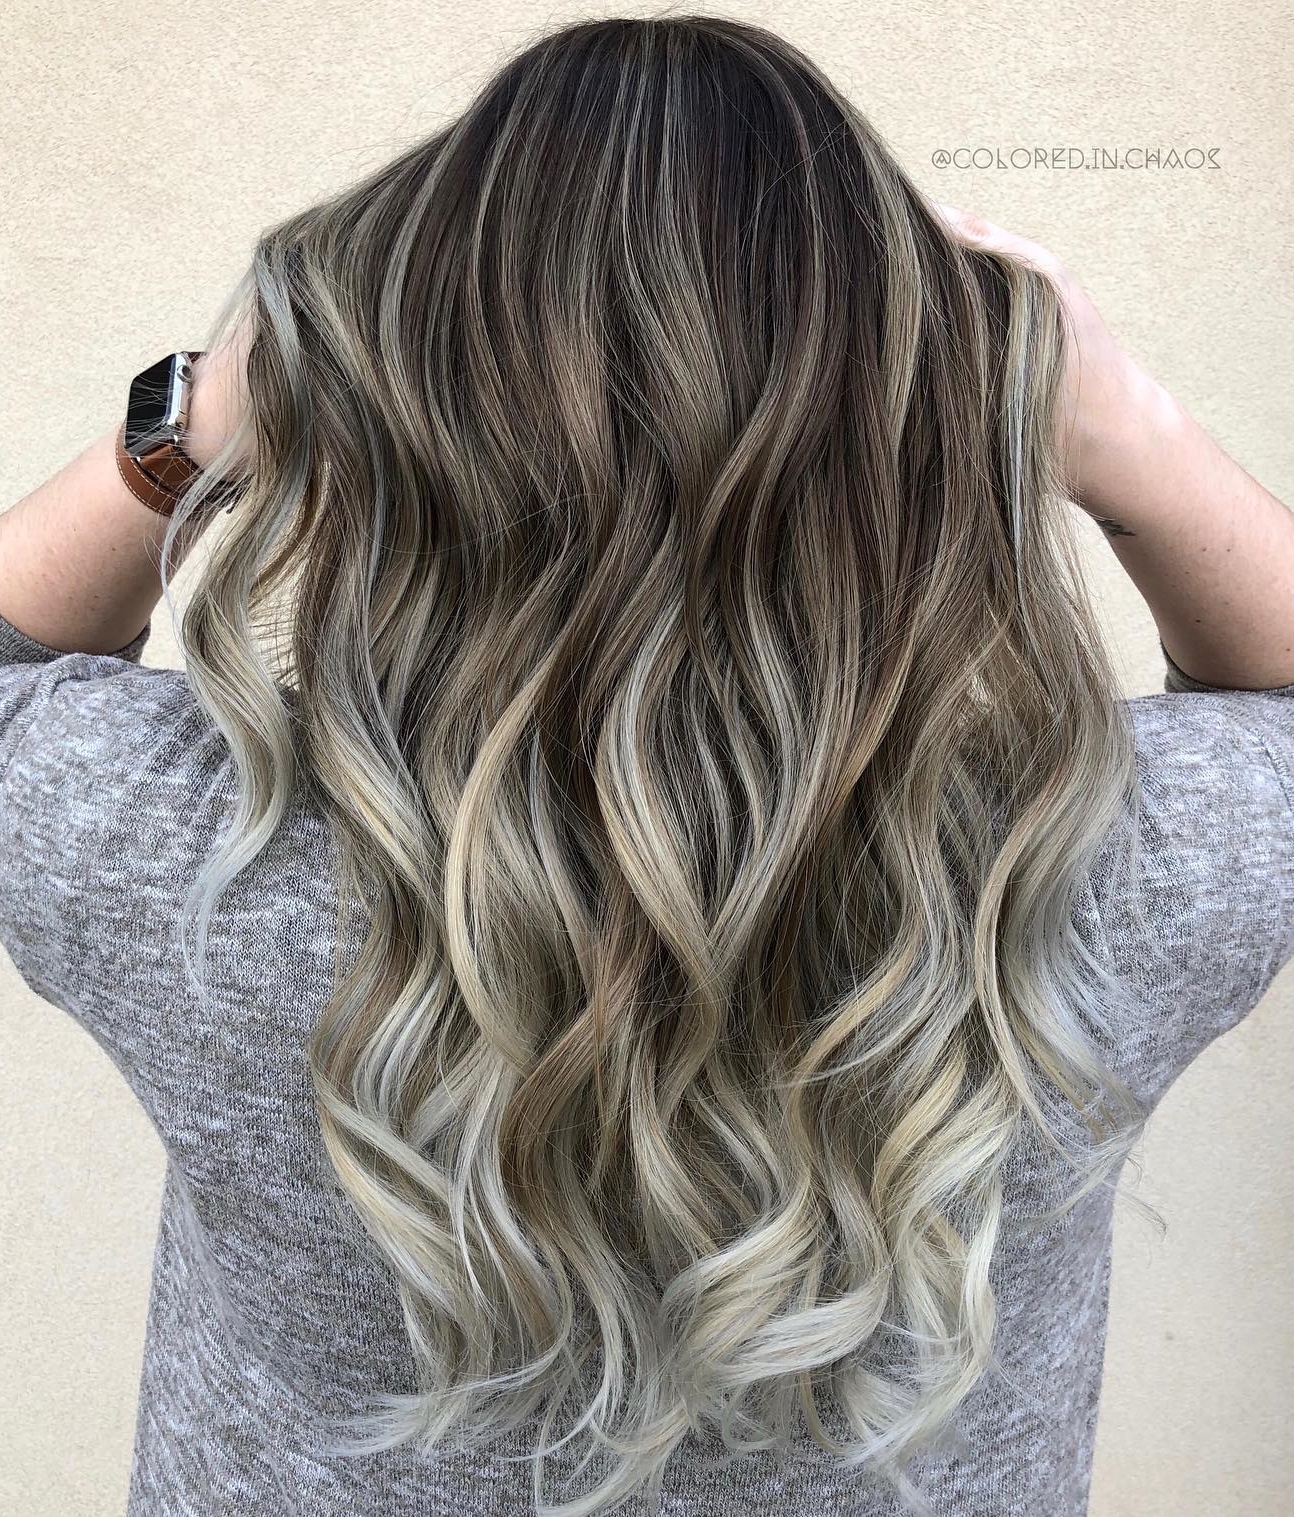 Long Ombre Hair with Wavy Blonde Ends